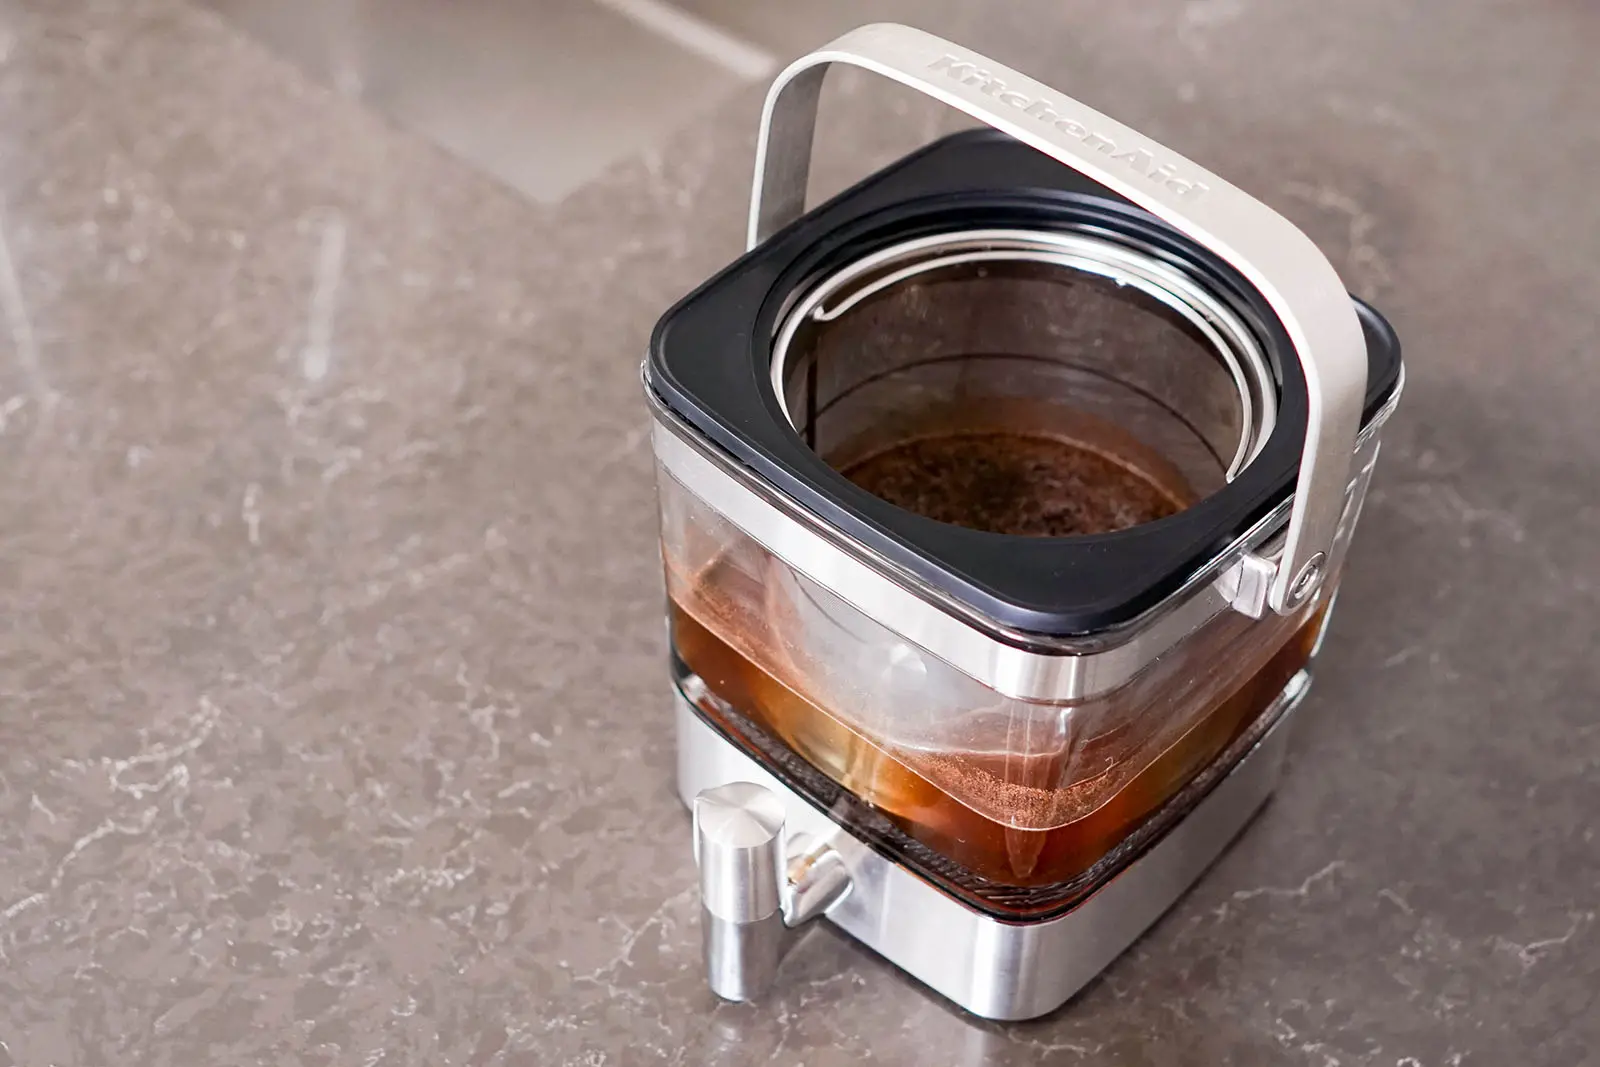 KitchenAid-Cold-Brew-Coffee-Maker-review-8